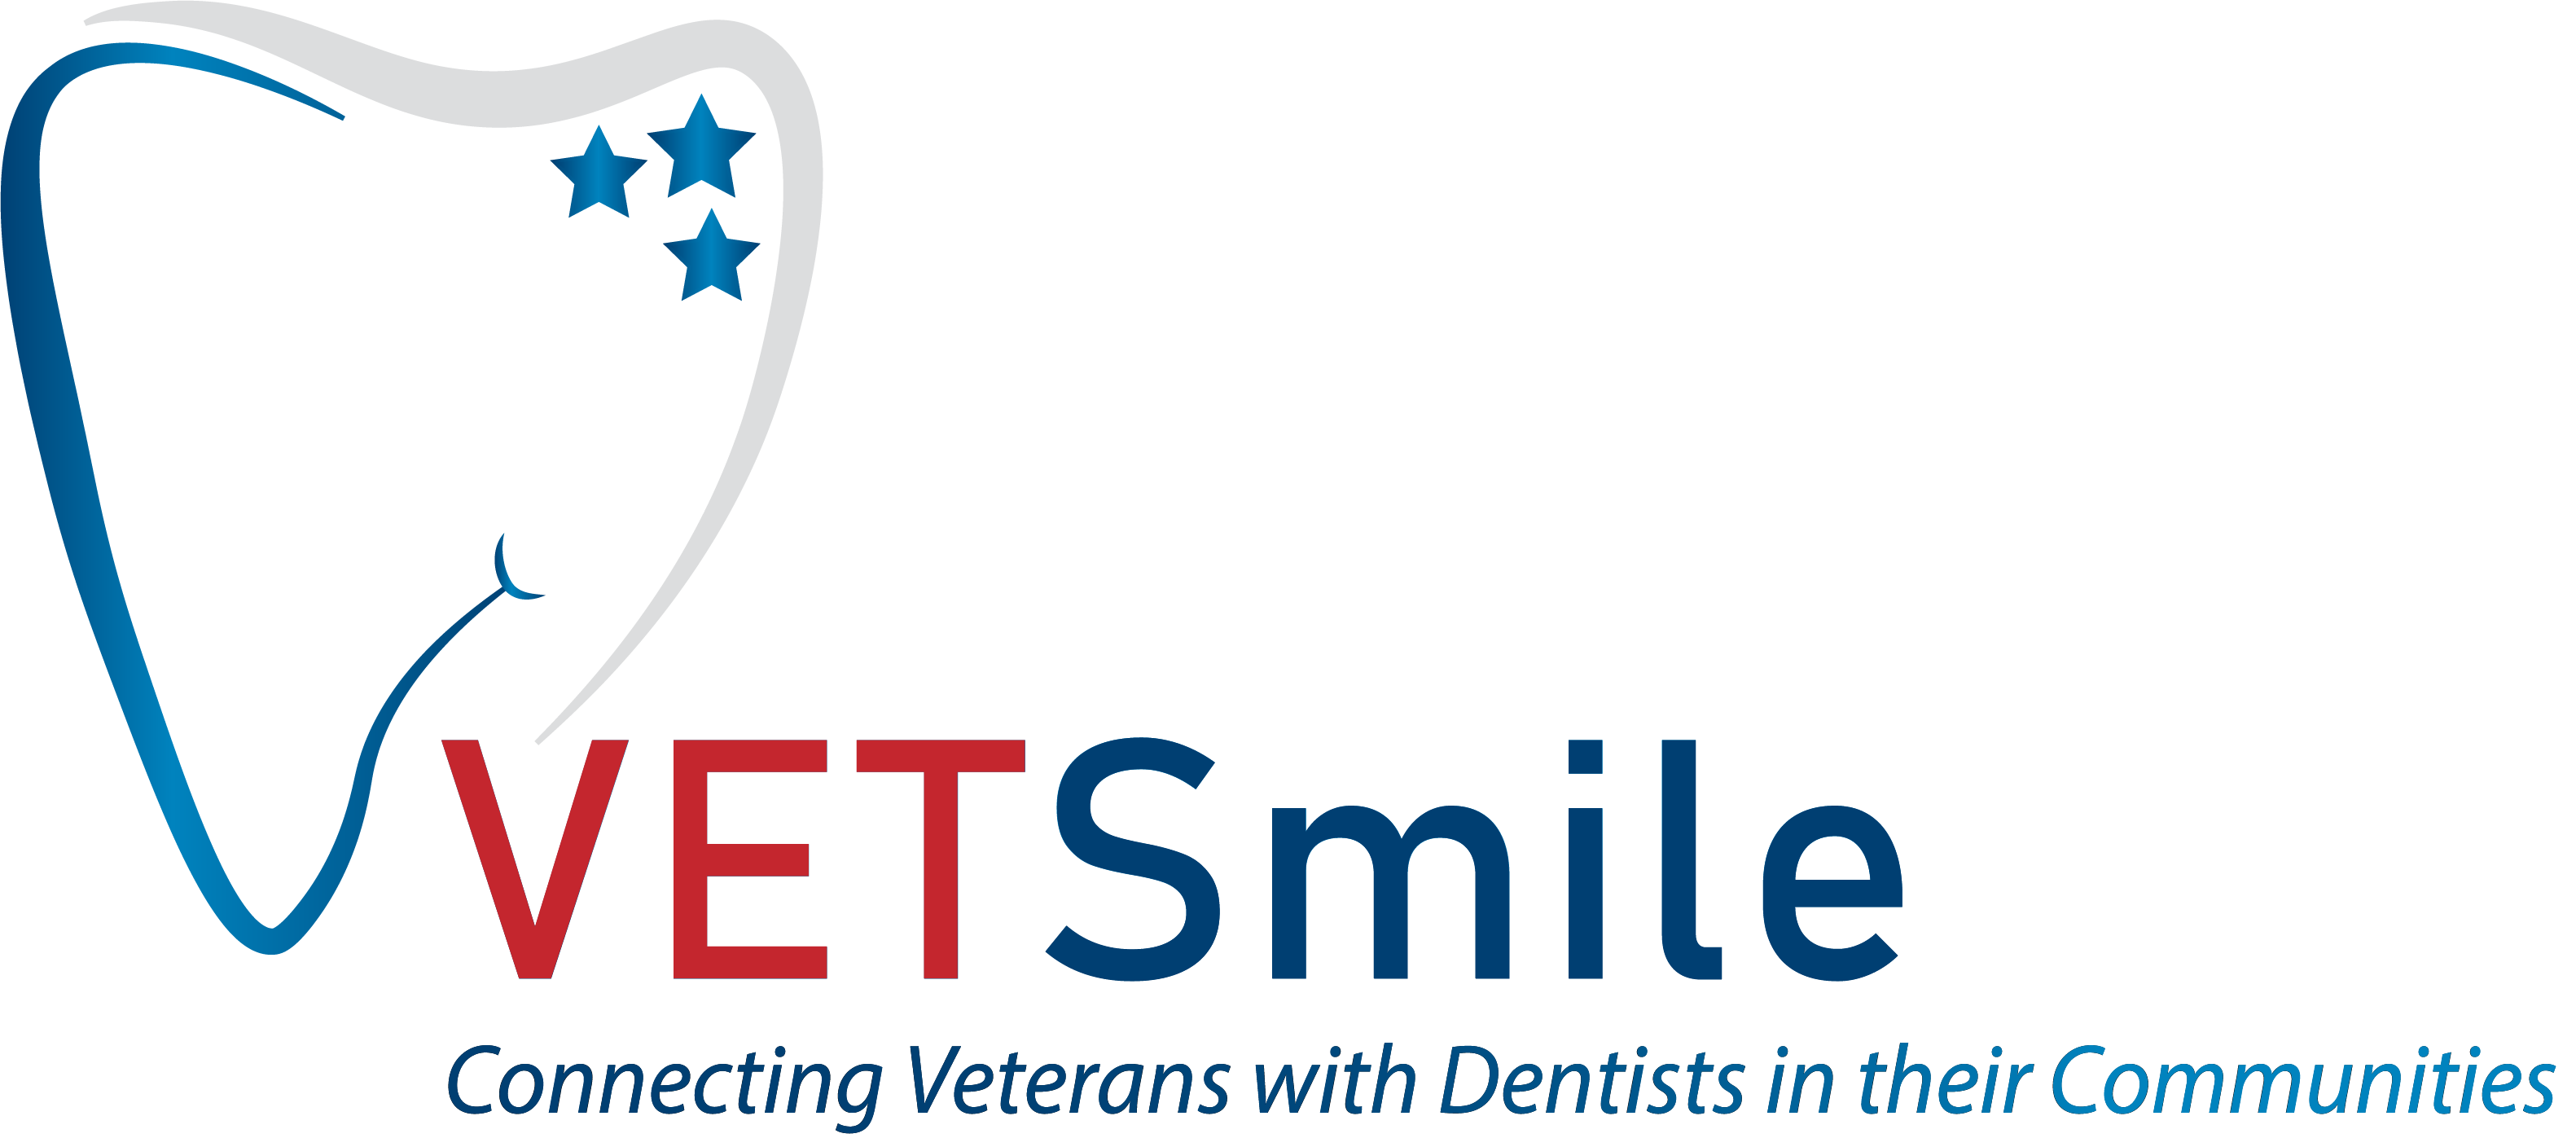 VETSmile logo with text Connecting Veterans with Dentists in their Communities